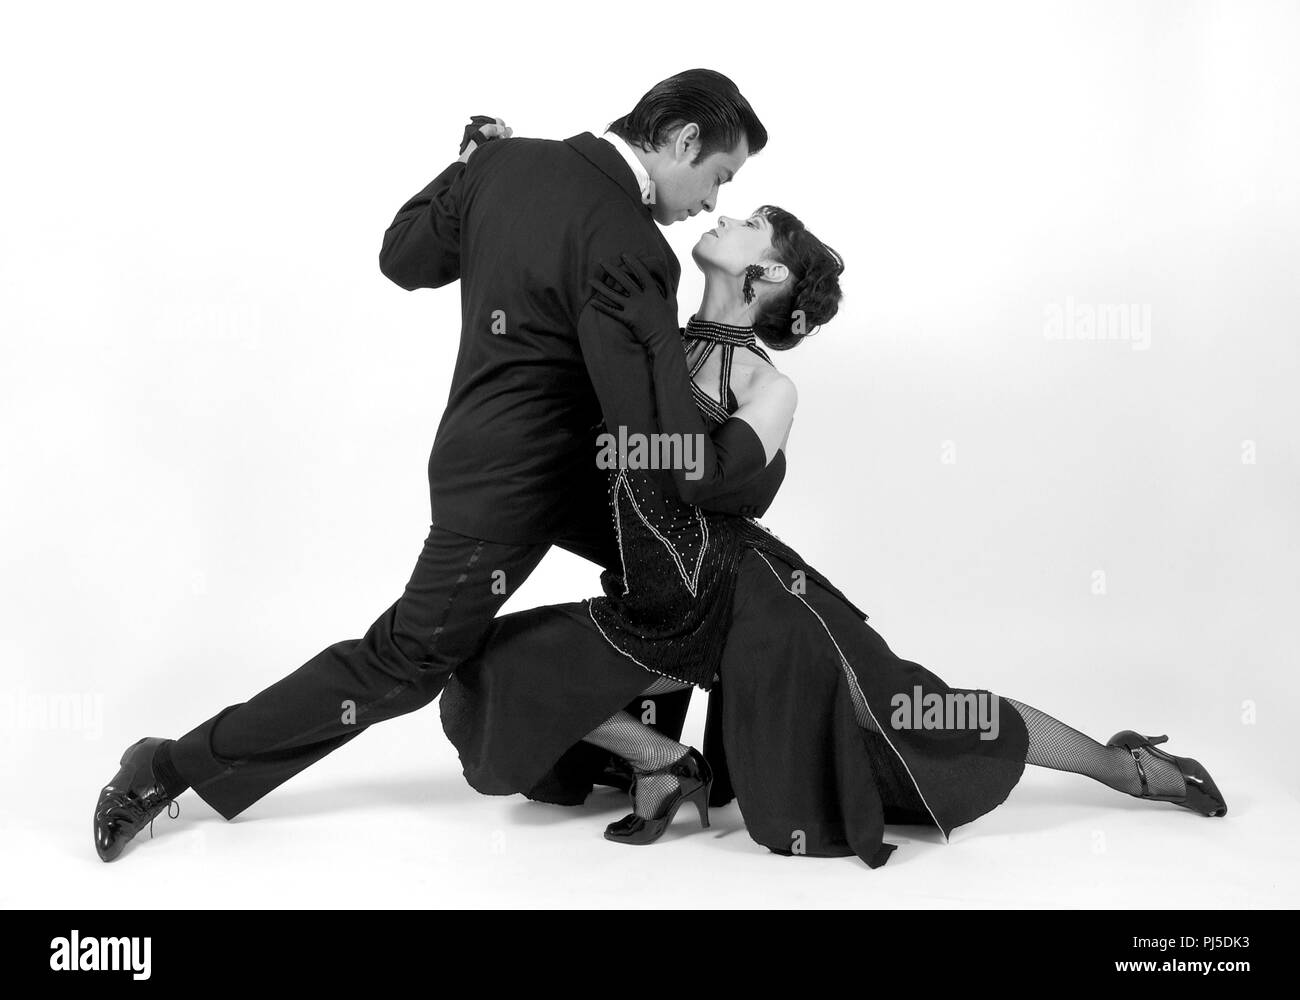 Professional dance teachers and tango dance masters from Buenos Aires demonstrating classic argentinian tango poses Stock Photo